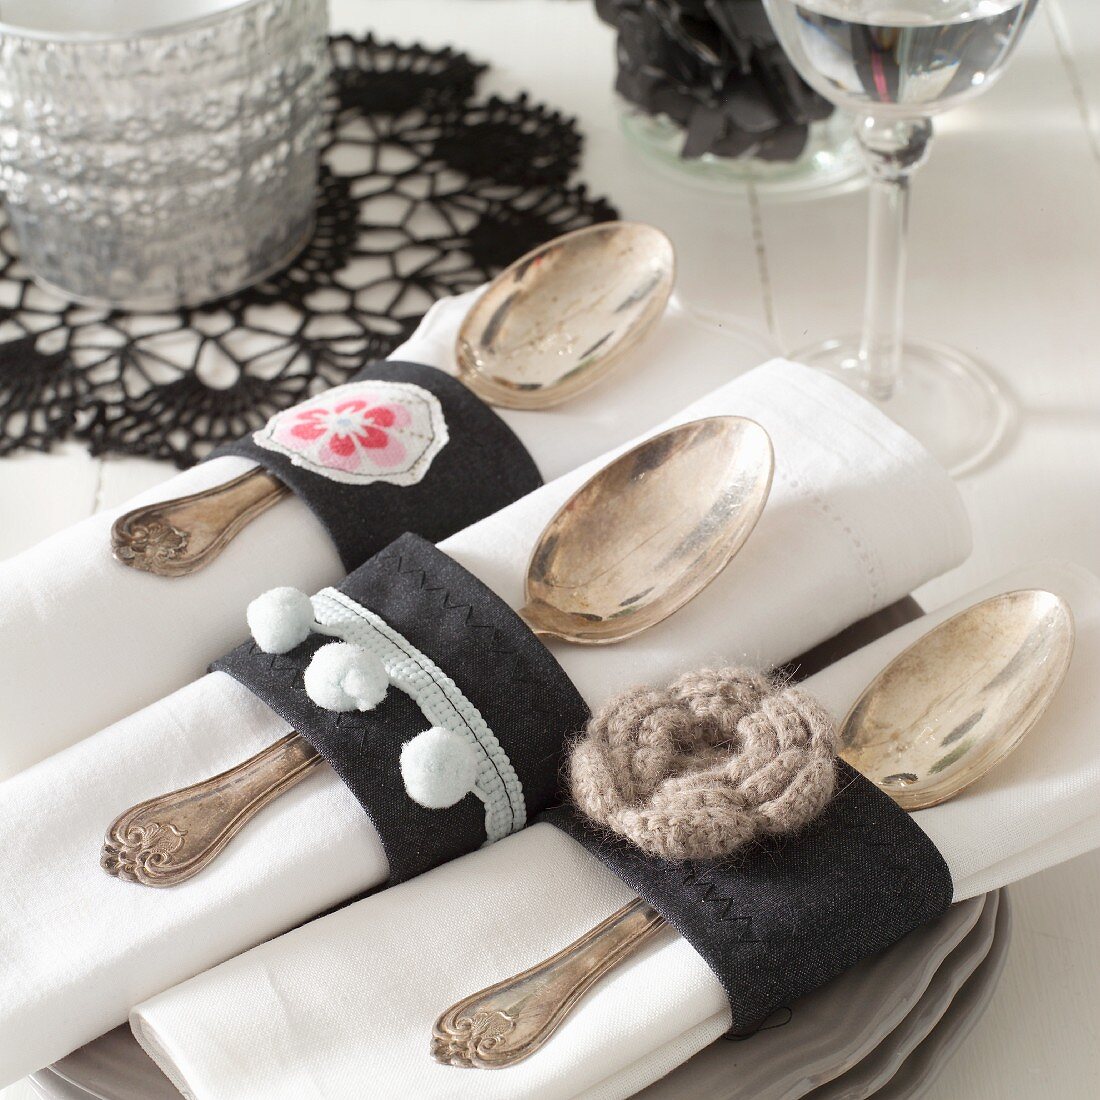 Hand-sewn napkin rings made from black fabric with appliqué flowers holding linen napkins and silver spoons